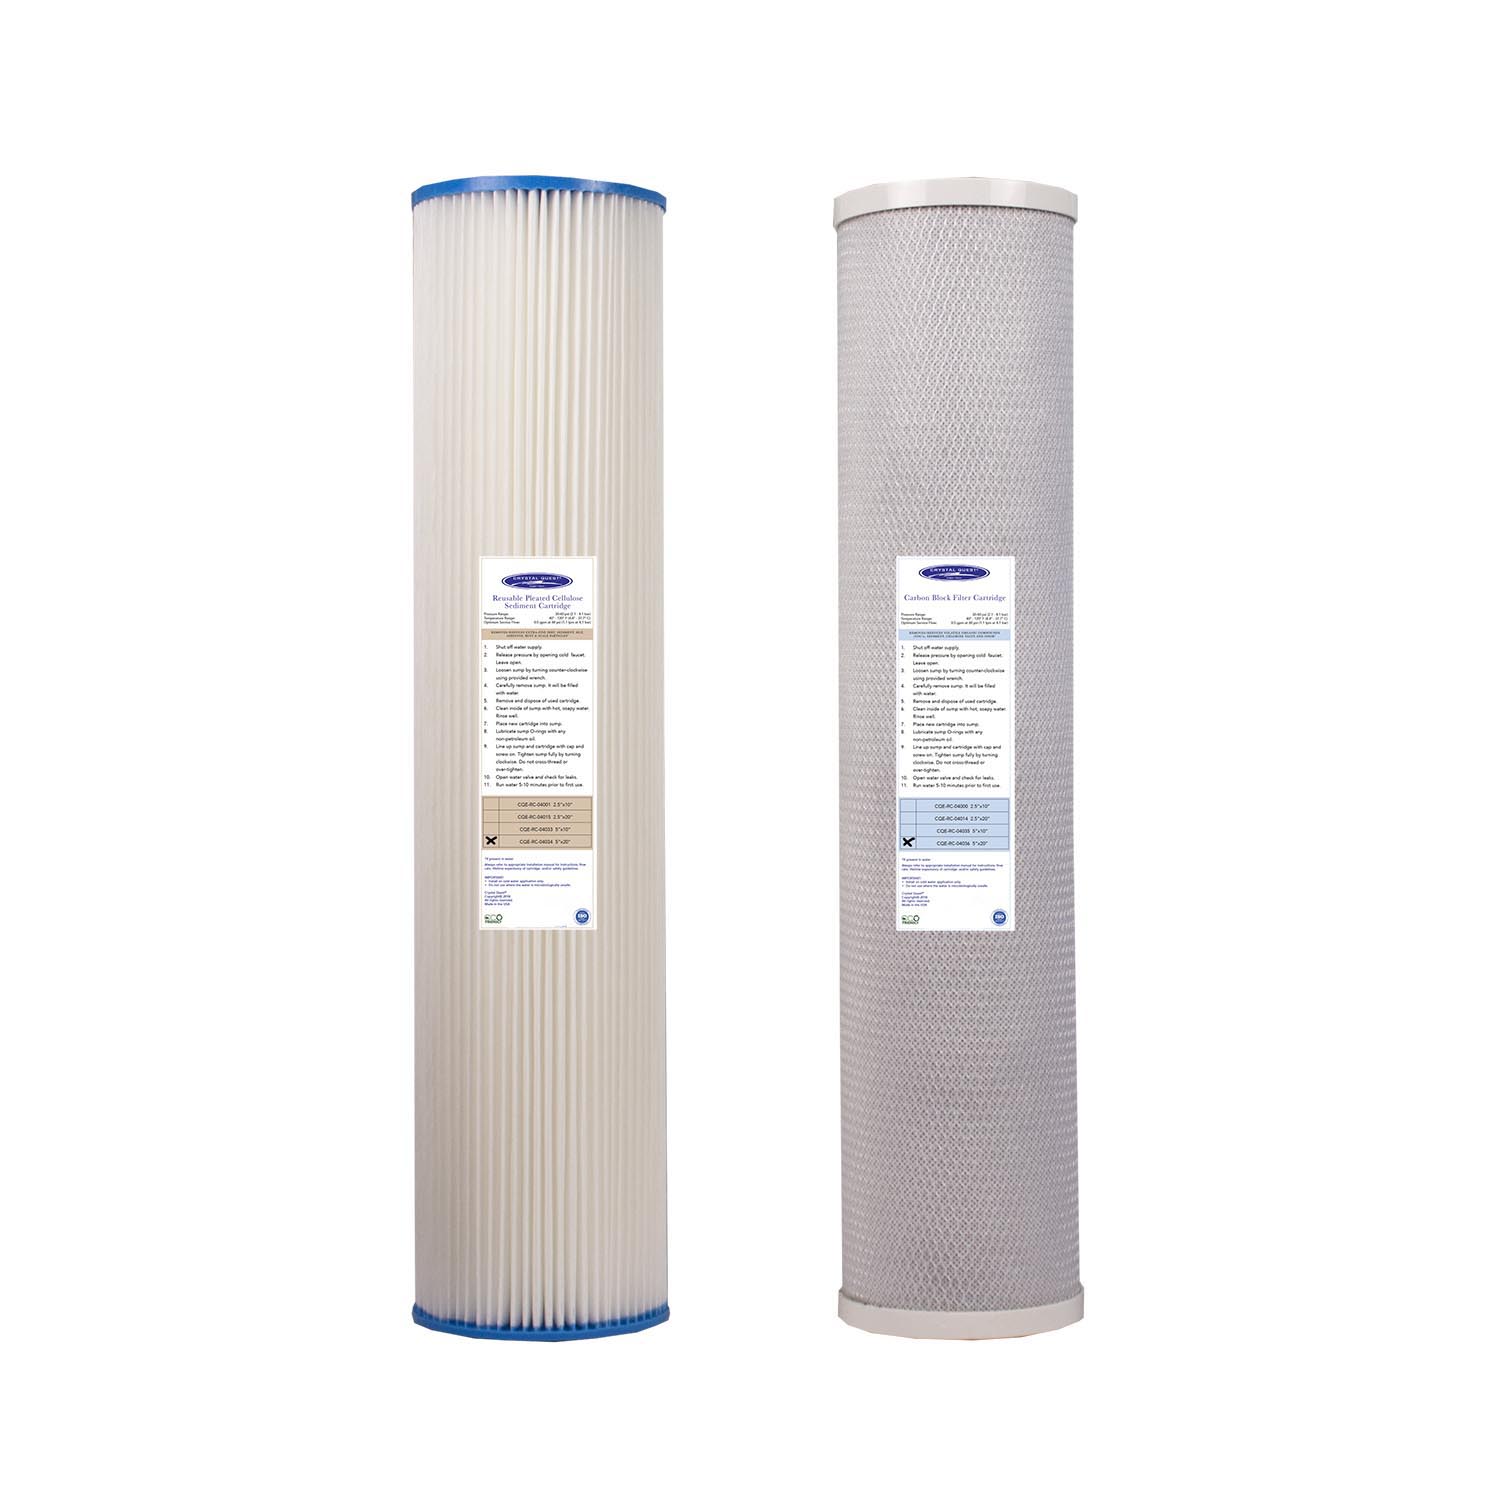 Crystal Quest, 1500/2500 GPD Whole House RO Filter Pack